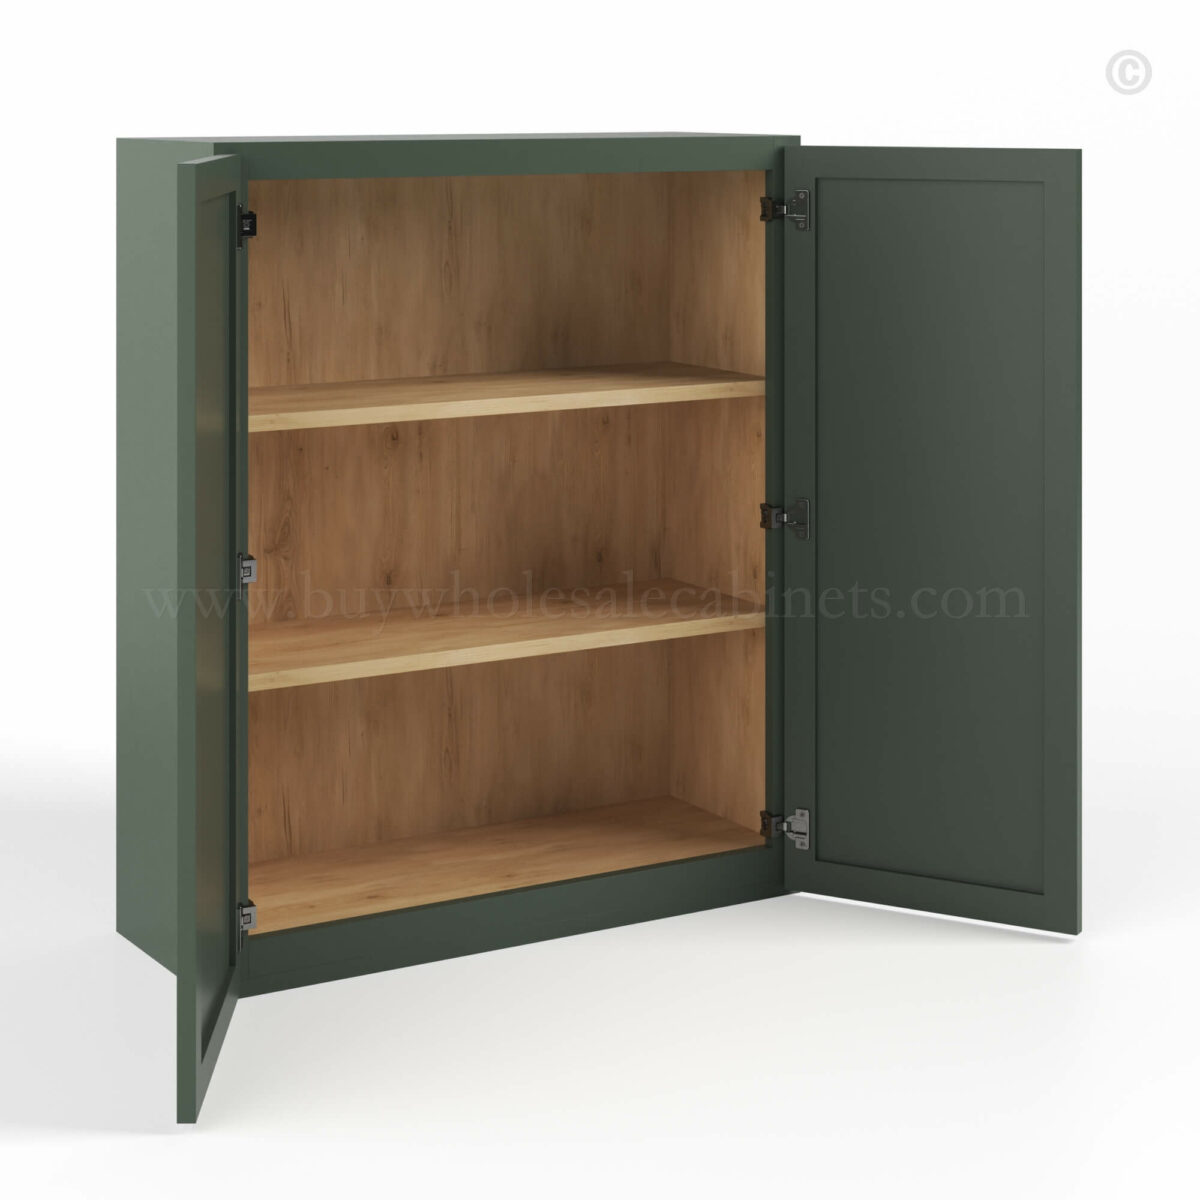 Slim Shaker Green Double Door Wall Cabinets 30″H, rta cabinets, wholesale cabinets